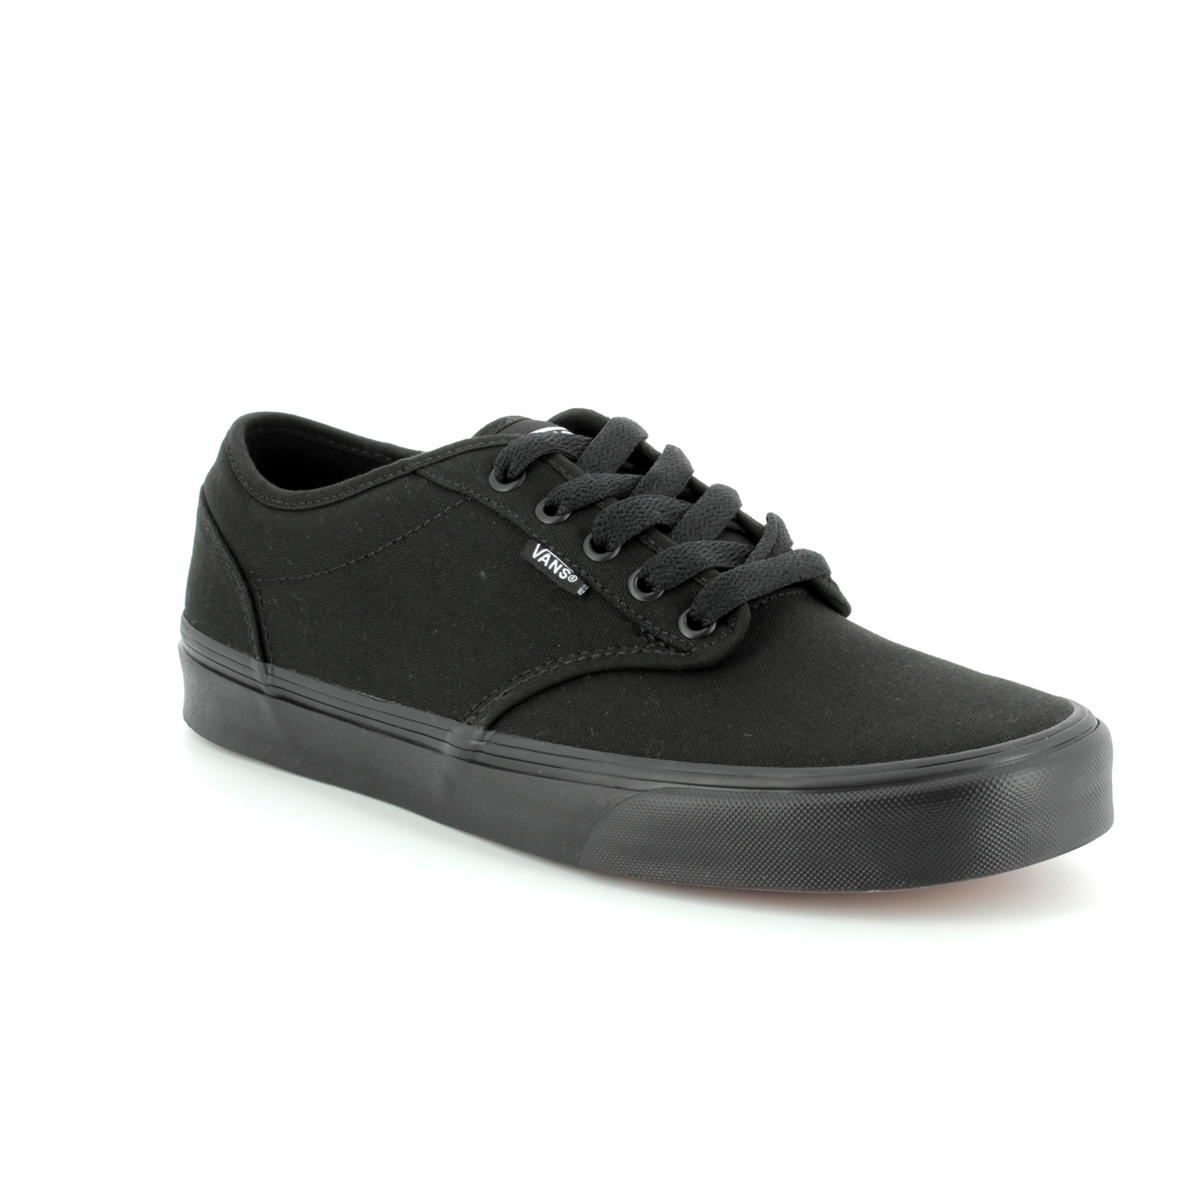 Vans Atwood Black Mens trainers VN000TUY1-861 in a Plain Canvas in Size 8